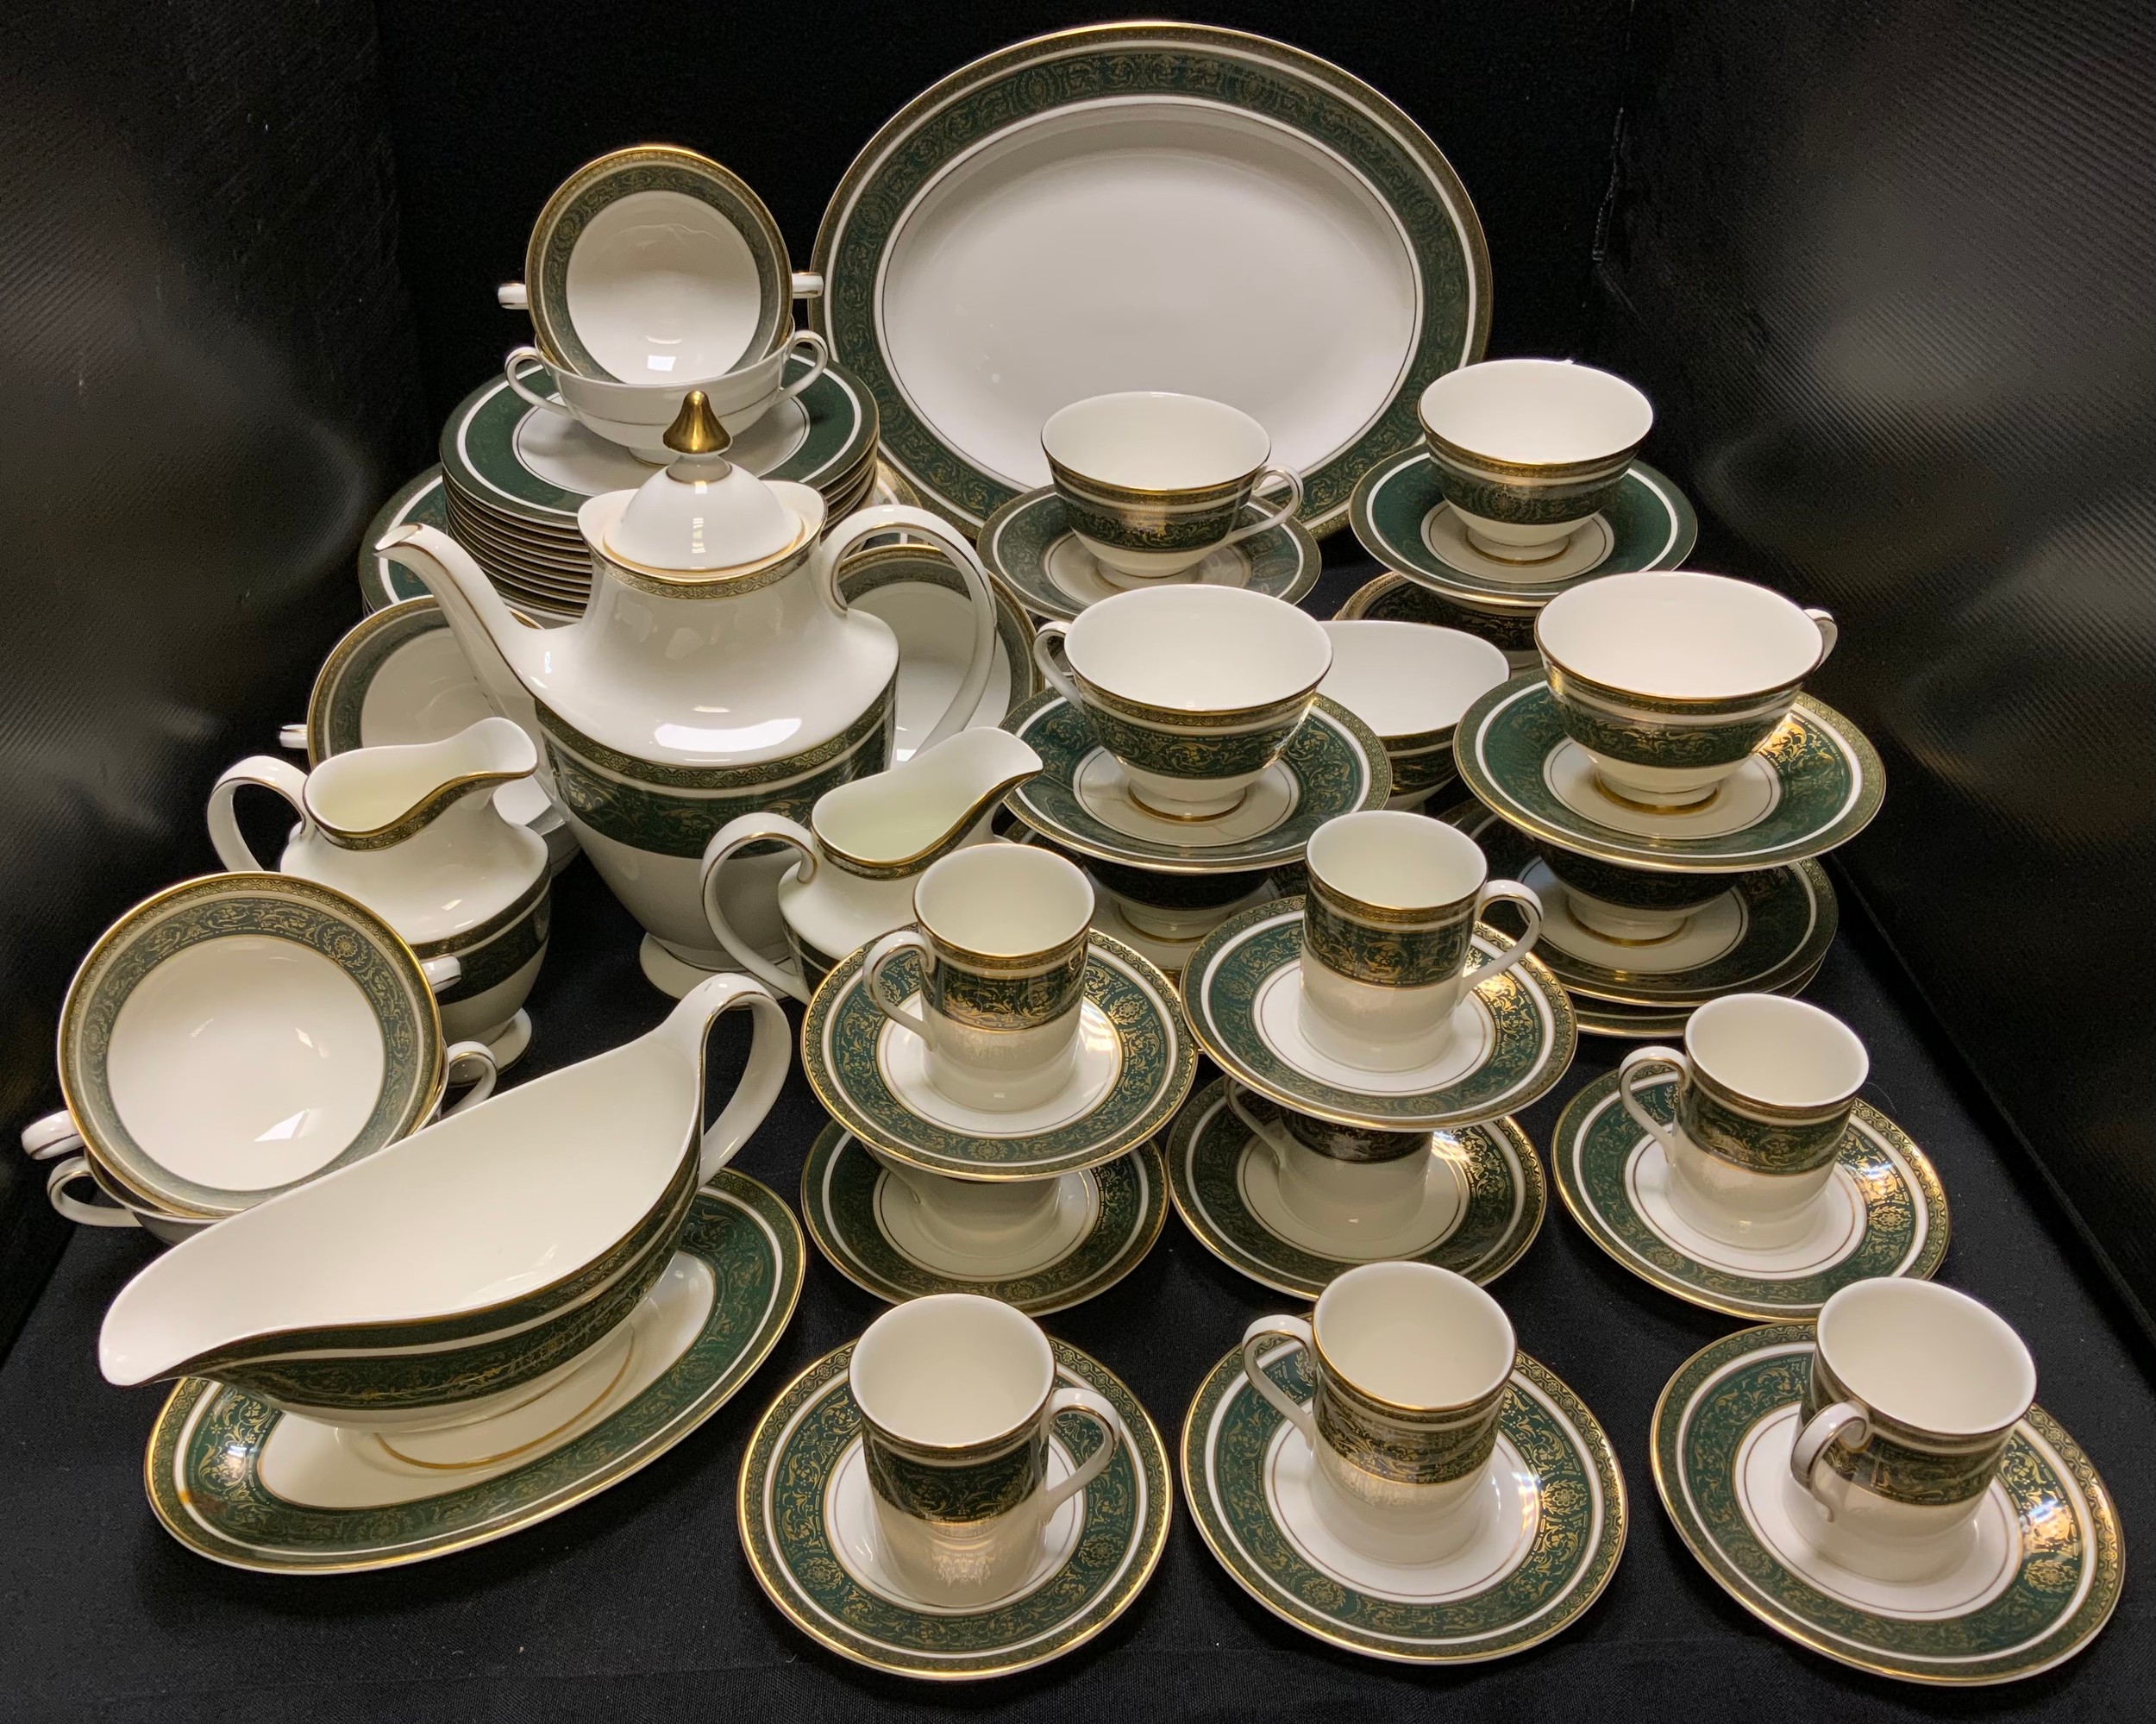 An extensive Royal Doulton Vanborough pattern table service for eight inc dinner plates, side plates